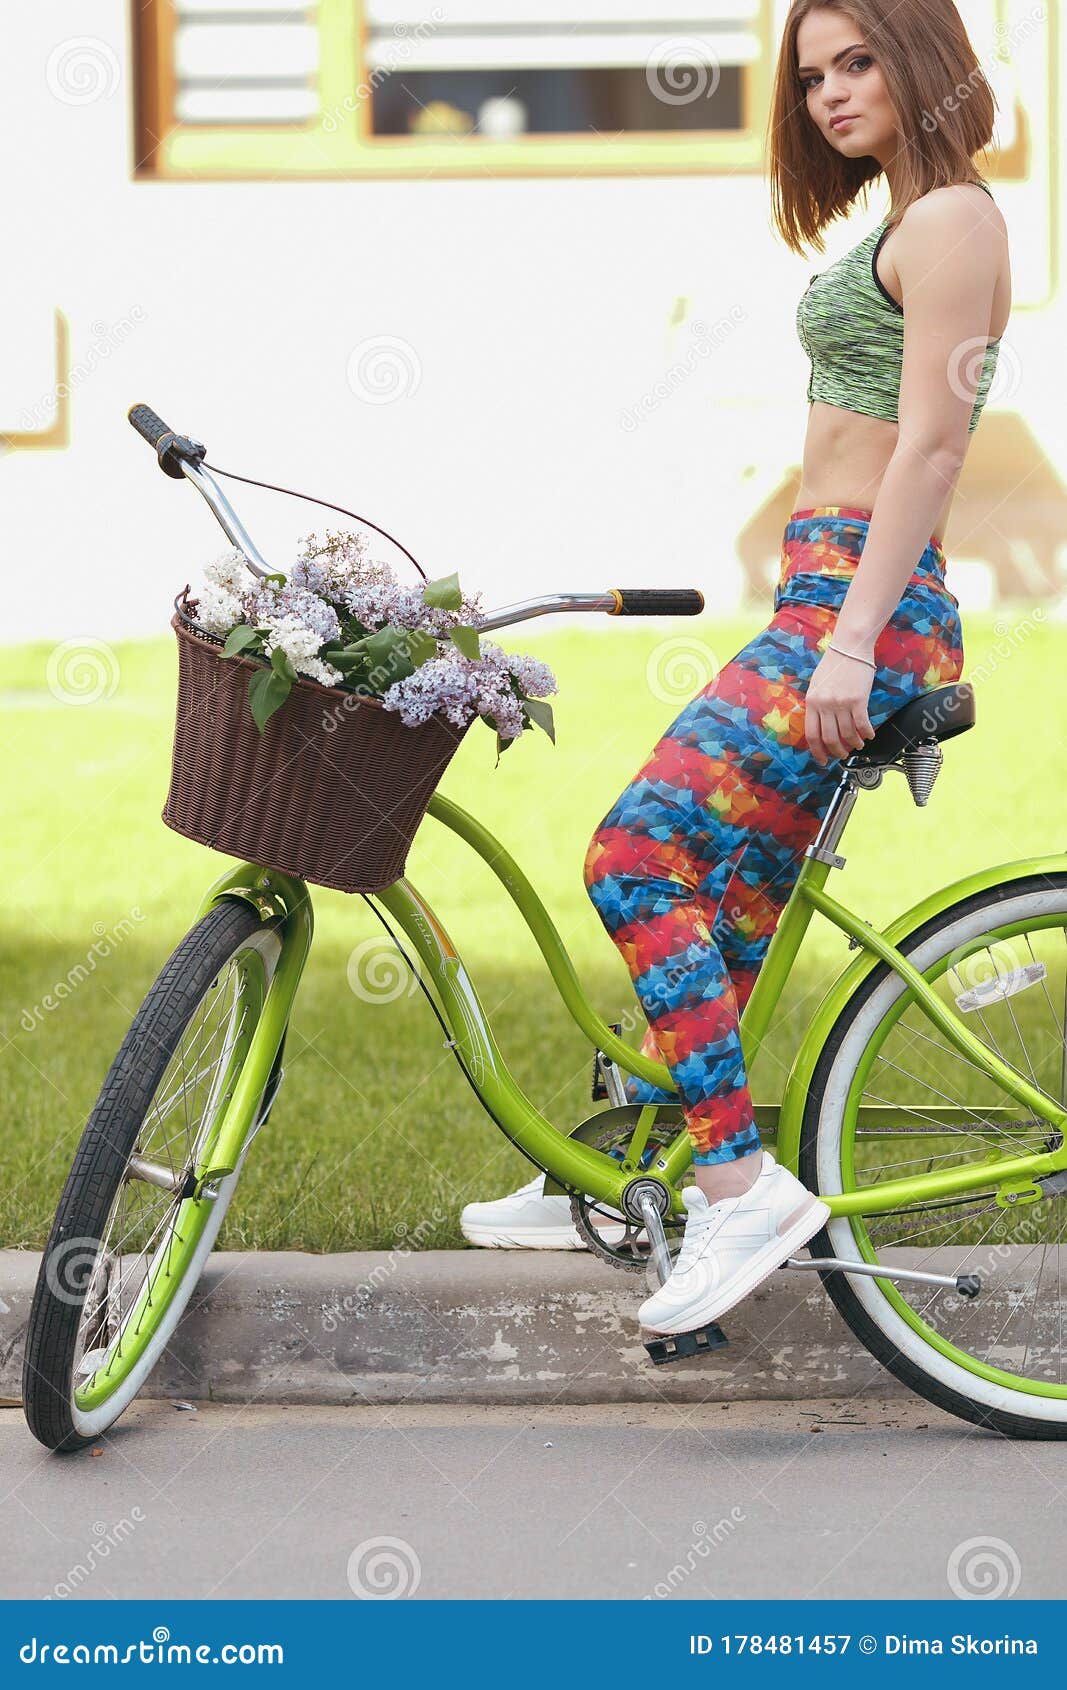 The Girl in Leggings and Top Engaged in Sports Cycling. Spring Stock Image  - Image of blue, green: 178481457